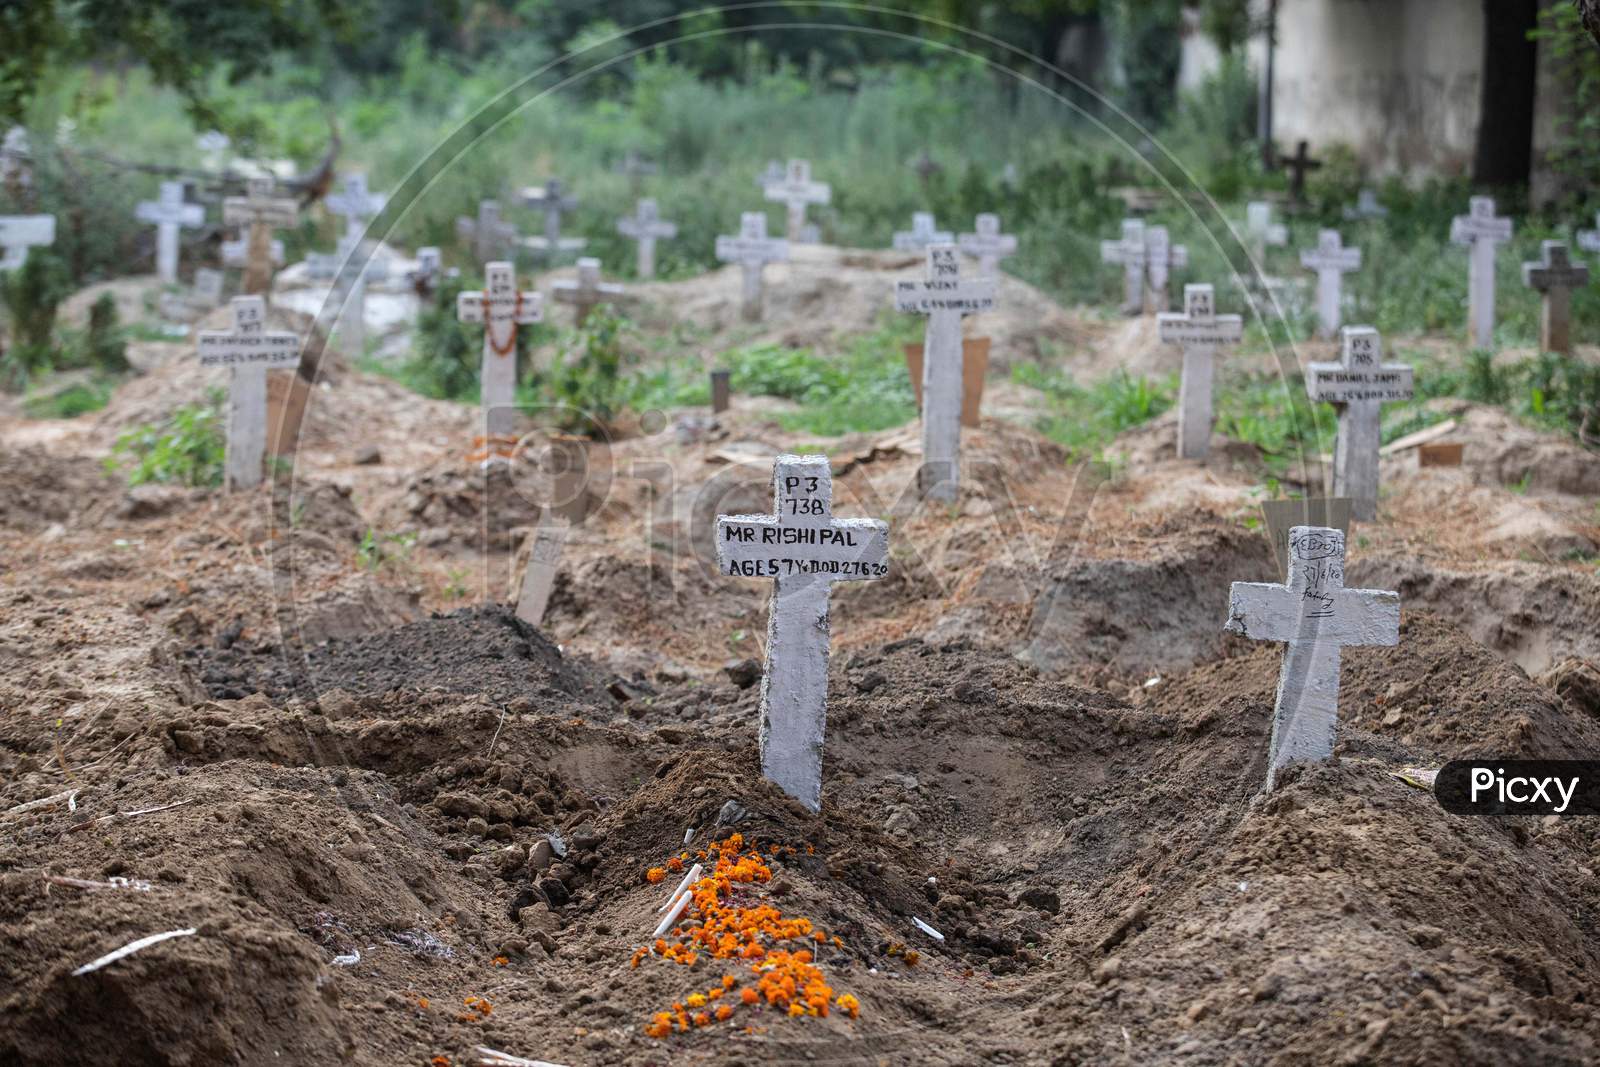 Flowers Over Fresh Grave Of  Covid-19 Victims  At Mangolpuri Cemetery  On July 1, 2020 In New Delhi, India.